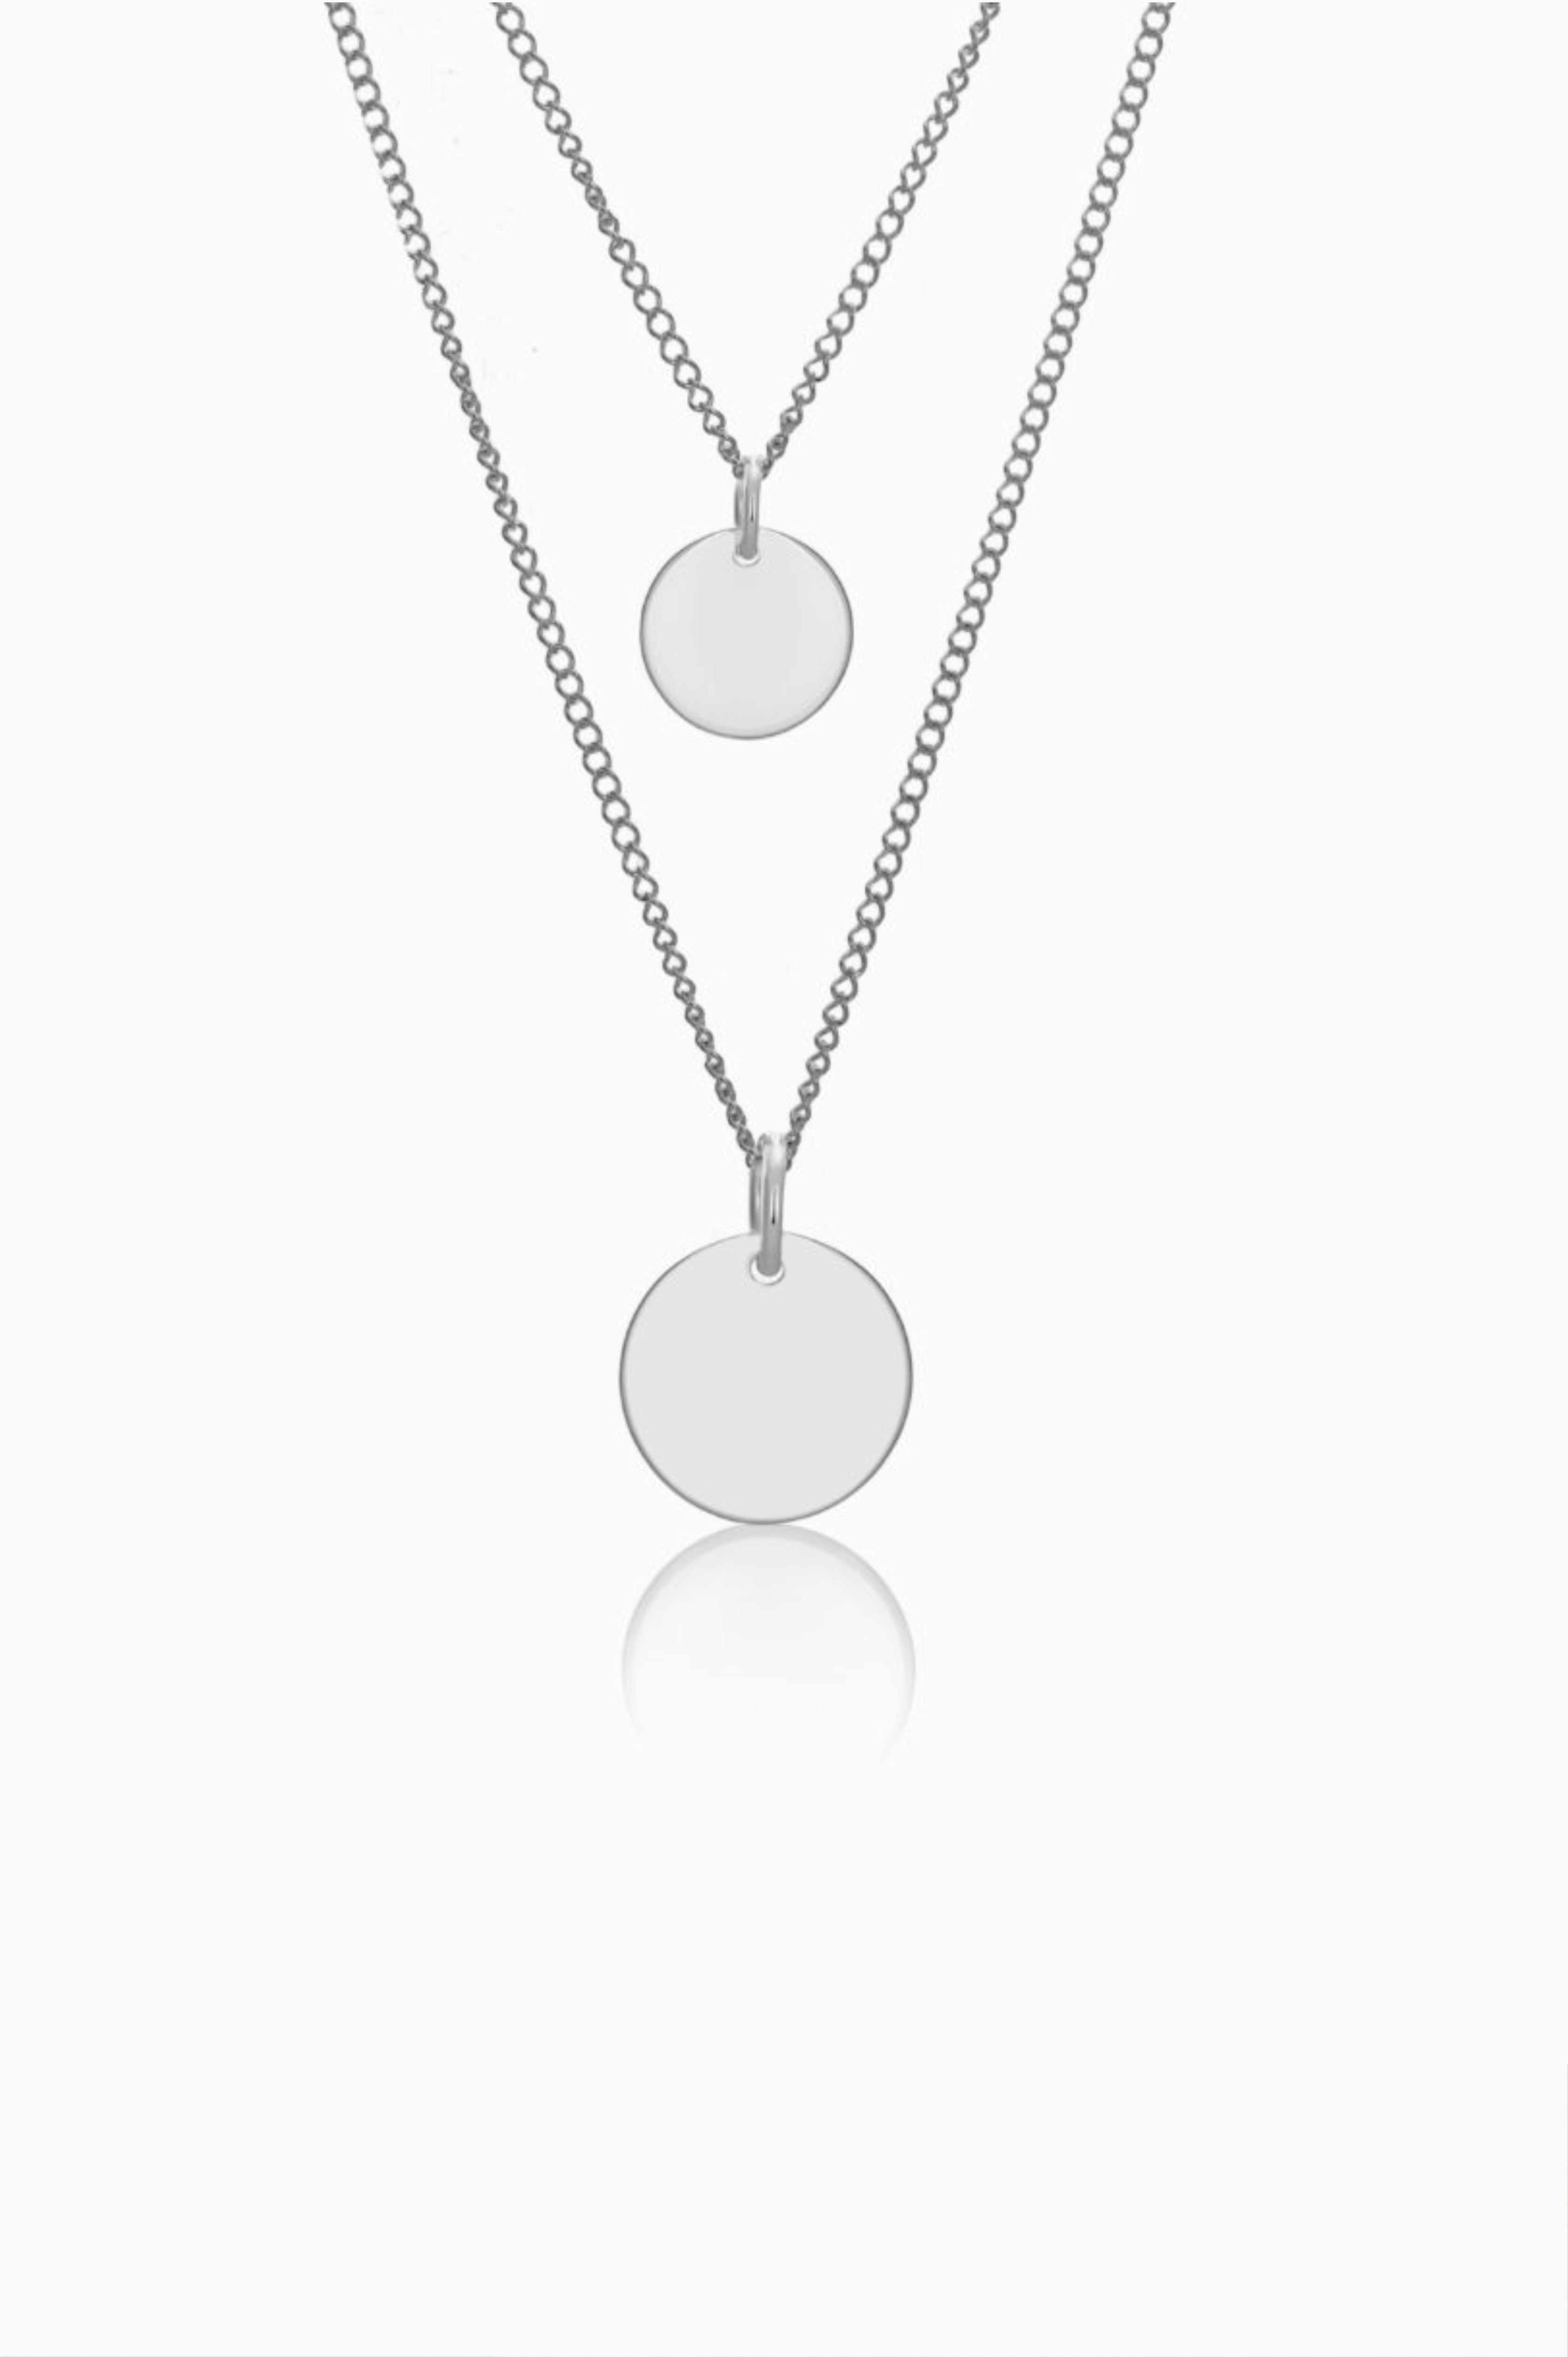 Necklace LAYERED COIN 925 silver